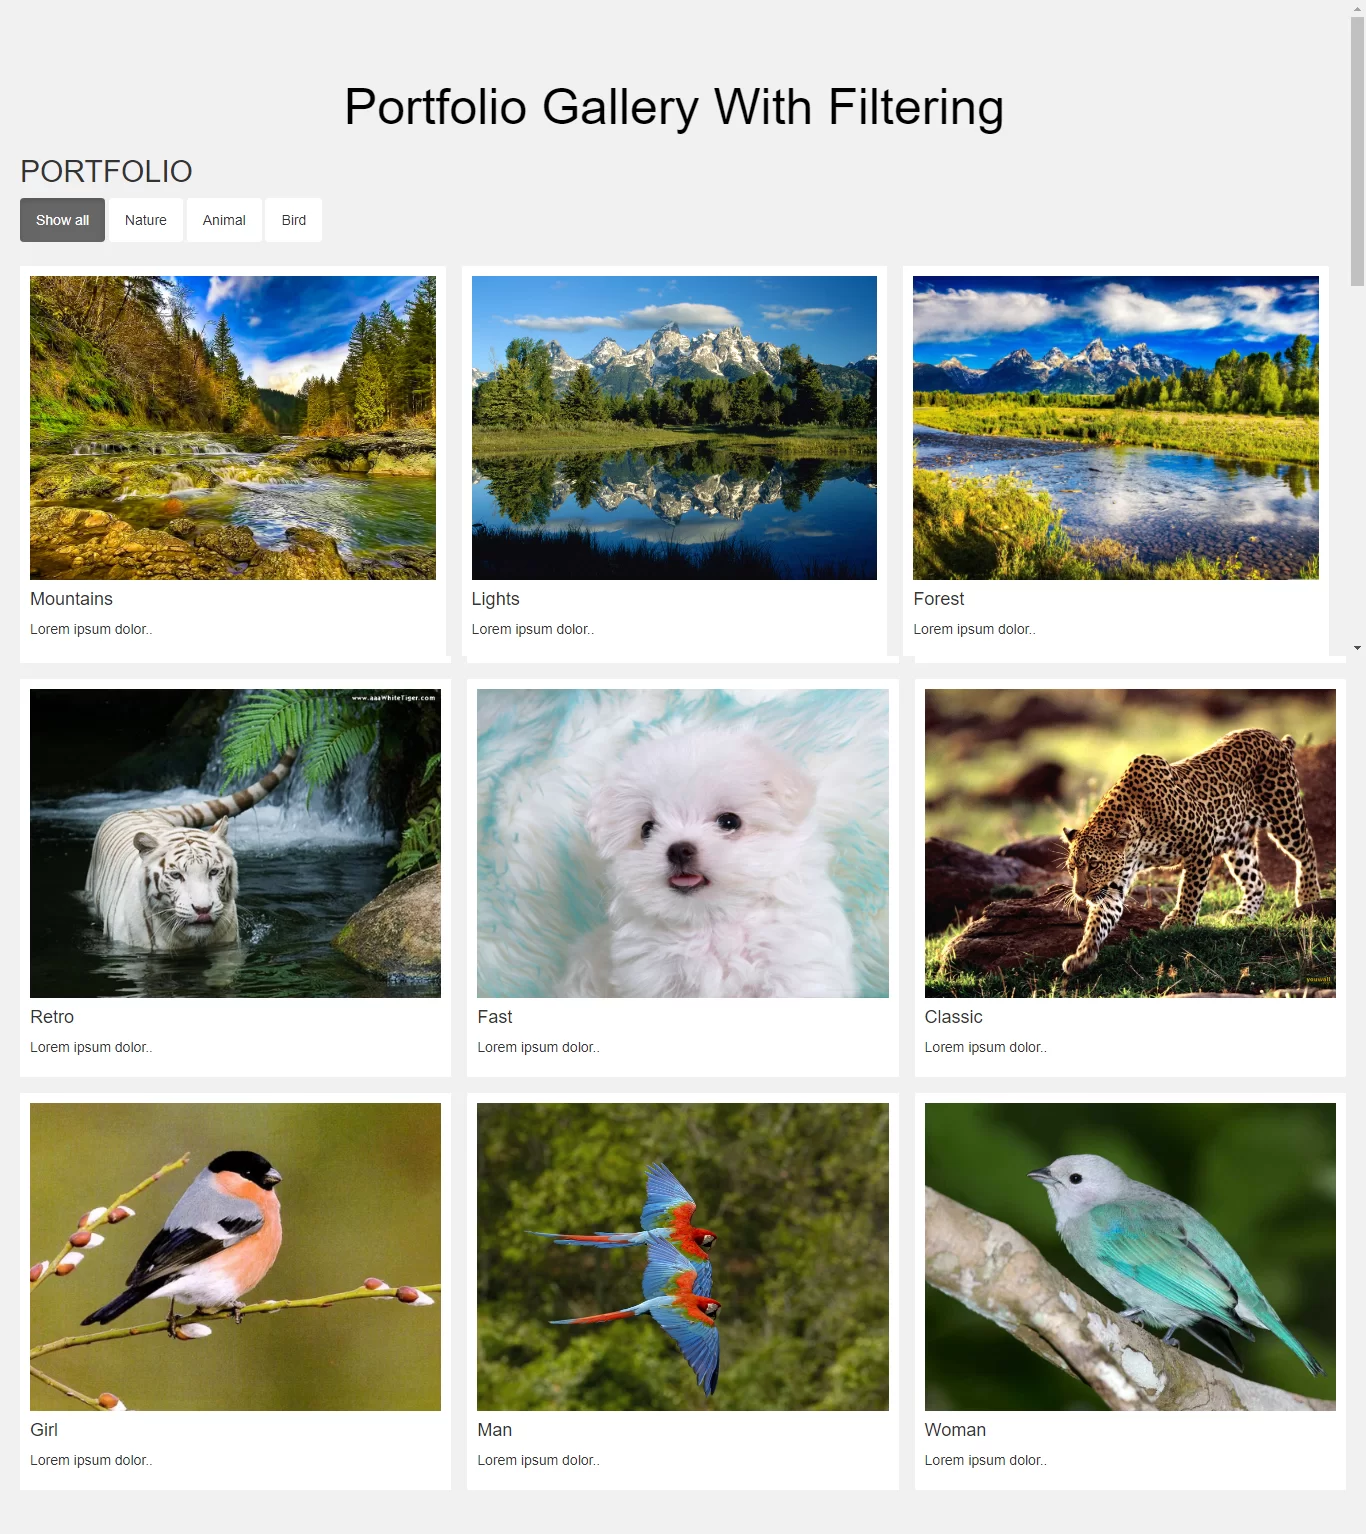 How Do I Create A Portfolio Gallery With Filtering